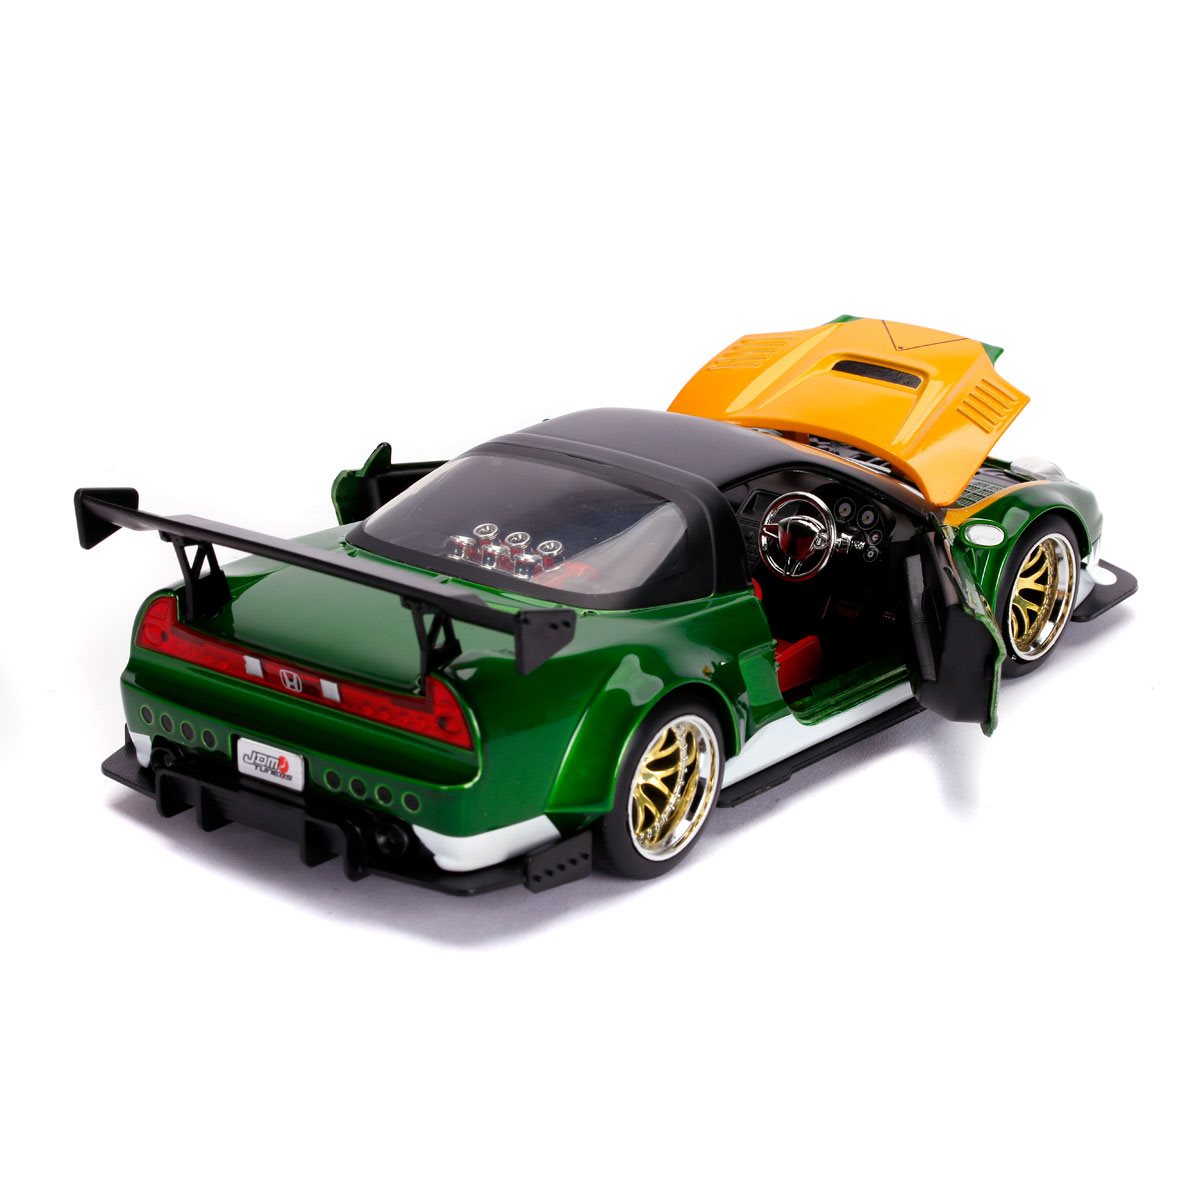 *Dent/Ding Packaging* - Mighty Morphin Power Rangers Green Ranger 2002 Honda NSX 1:24 Scale Die-Cast Metal Vehicle with Figure